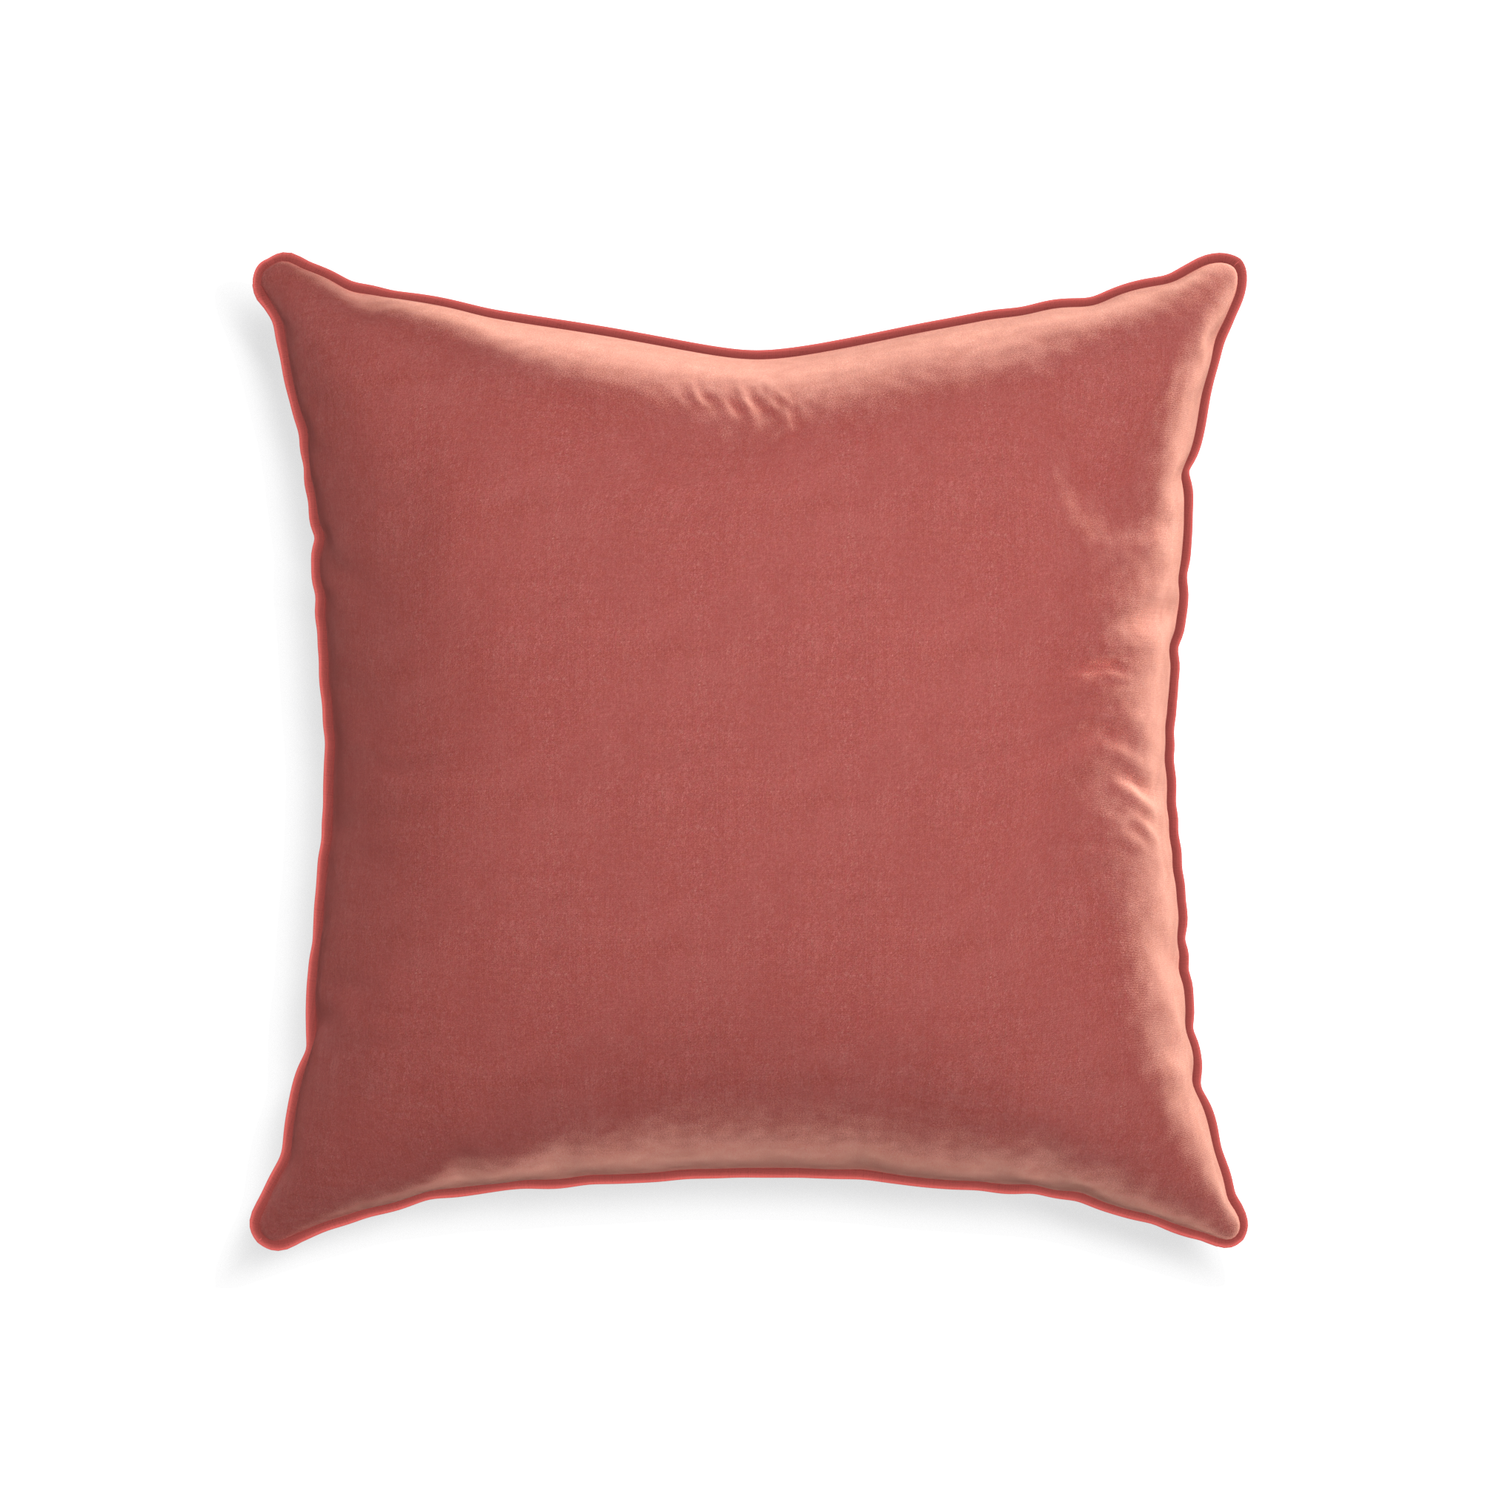 22-square cosmo velvet custom pillow with c piping on white background